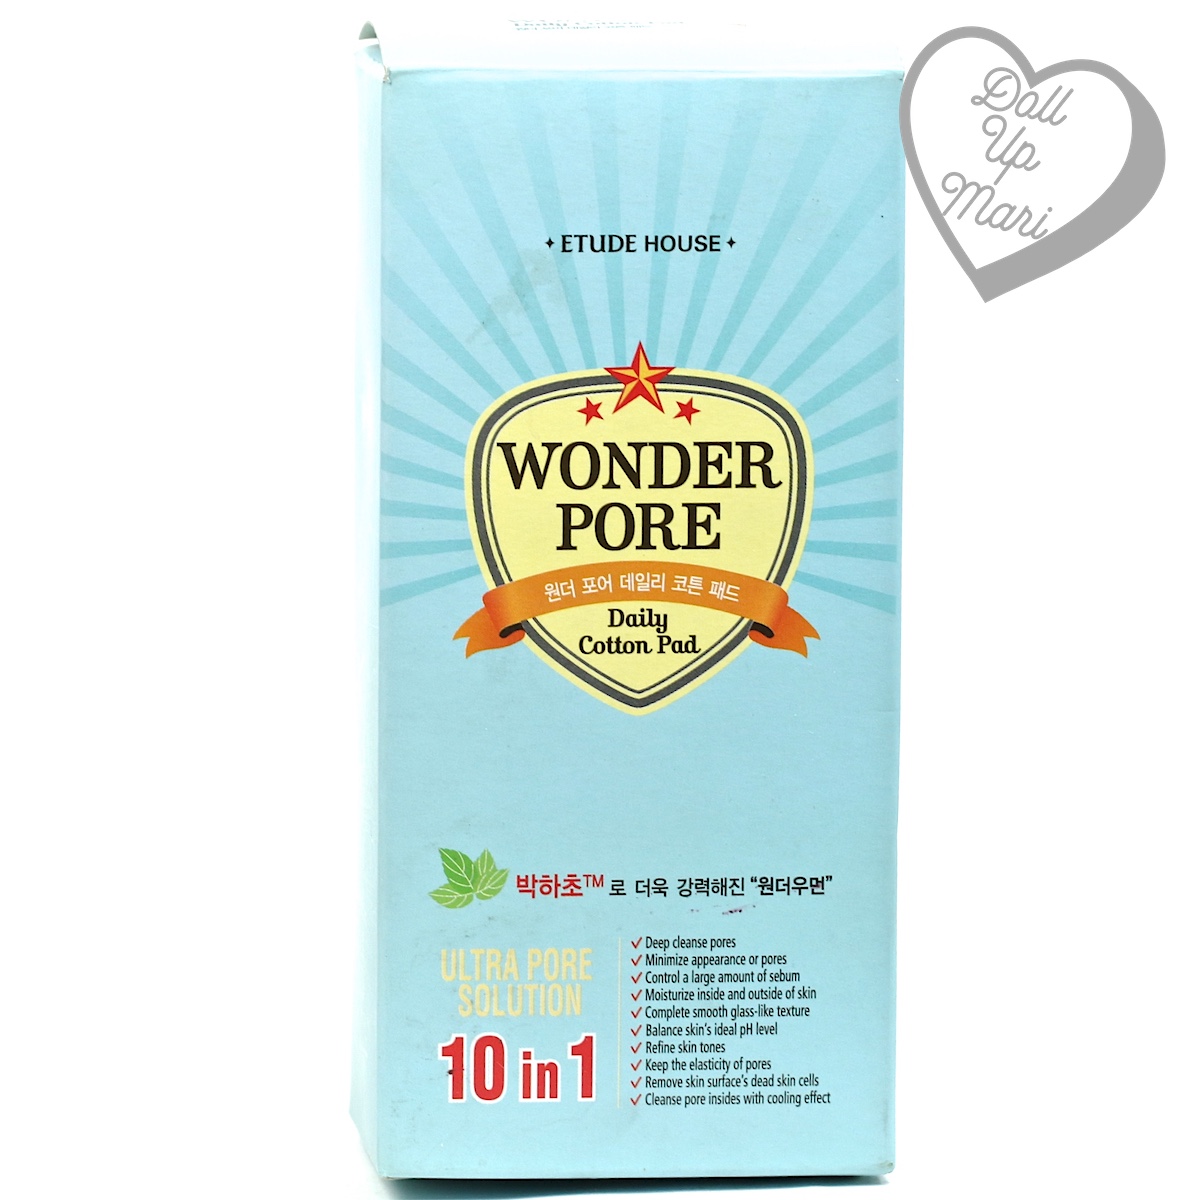 Pack shot of box of Etude House Wonder Pore Daily Cotton Pads